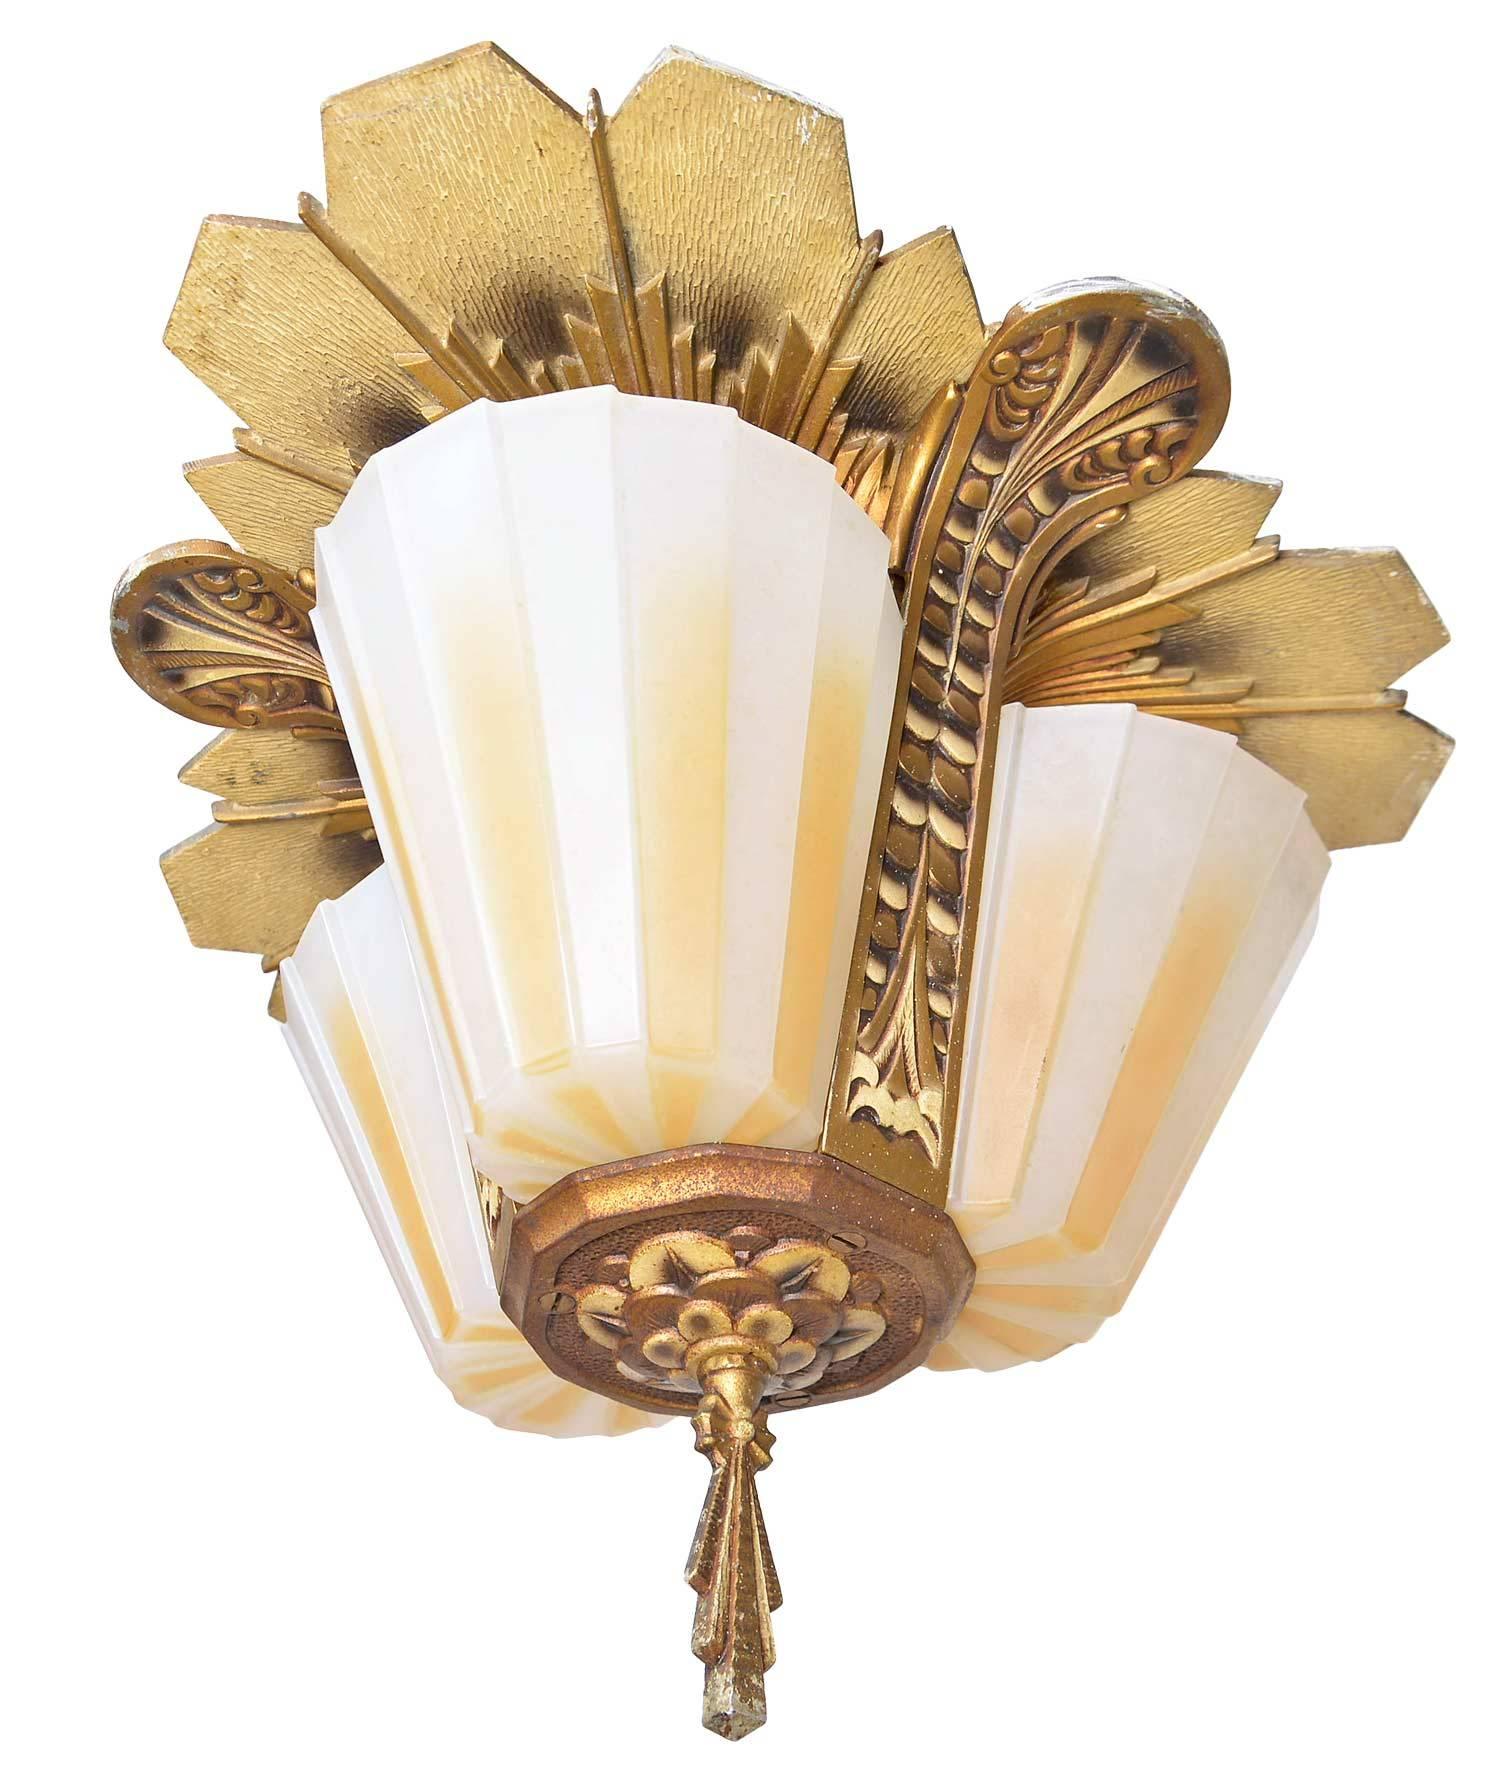 Brass flush mount fixture with art deco details throughout, by Beardslee Manufacturing Co. of Chicago, with three striped slipper shades. Pristine condition with original polychrome paint and signed shades. 

